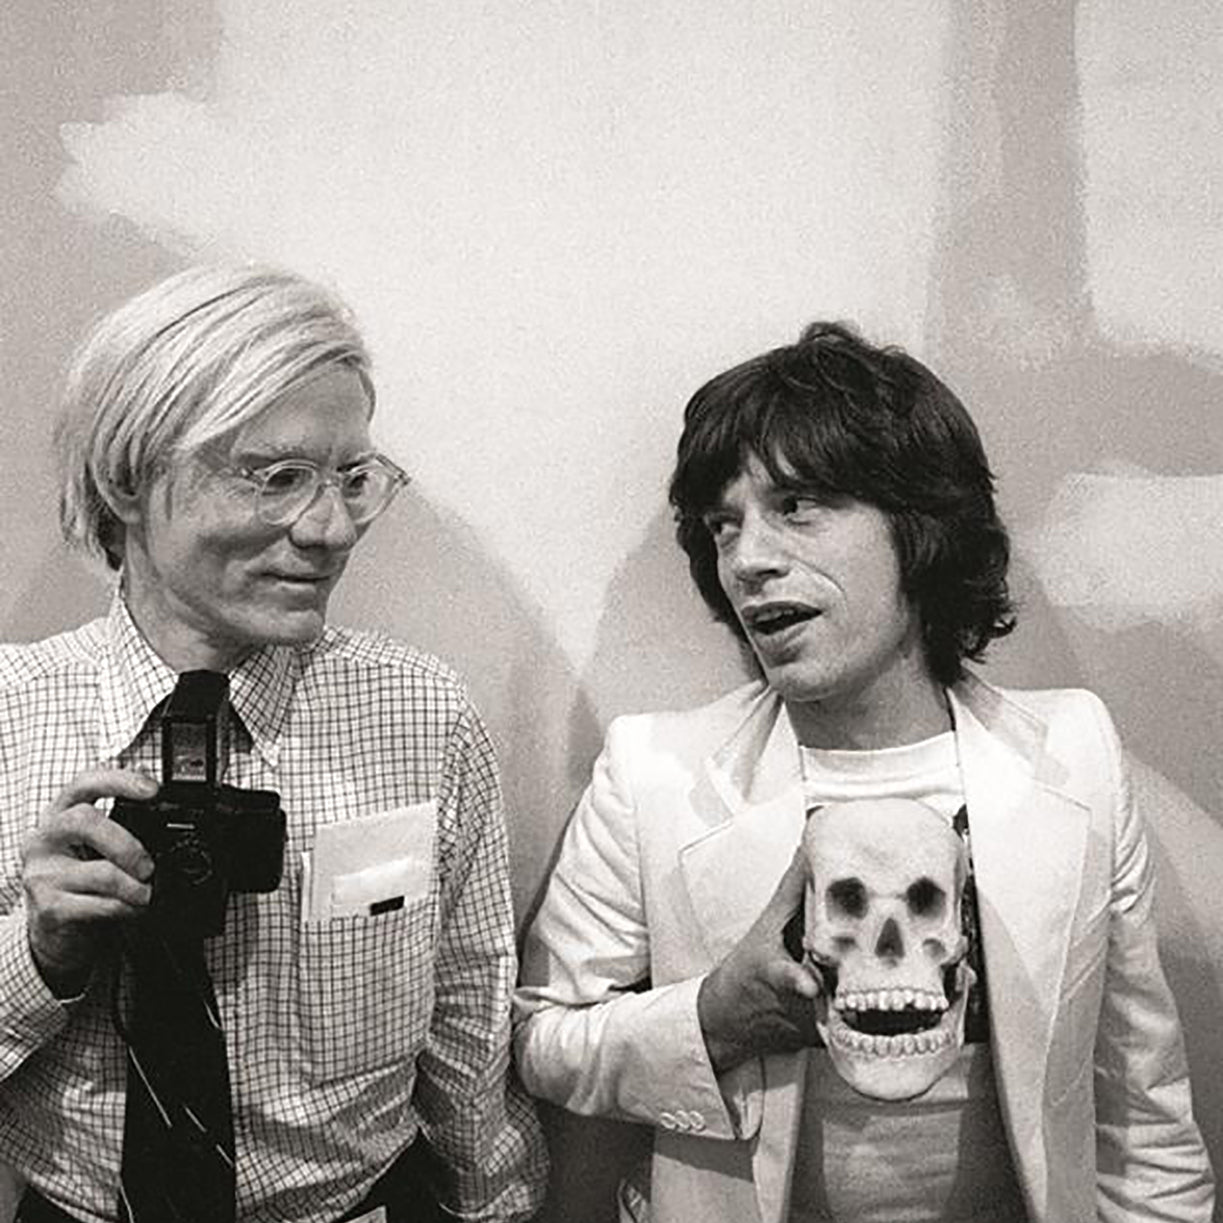 Andy Warhol's Mick Jagger Obsession - House of Roulx